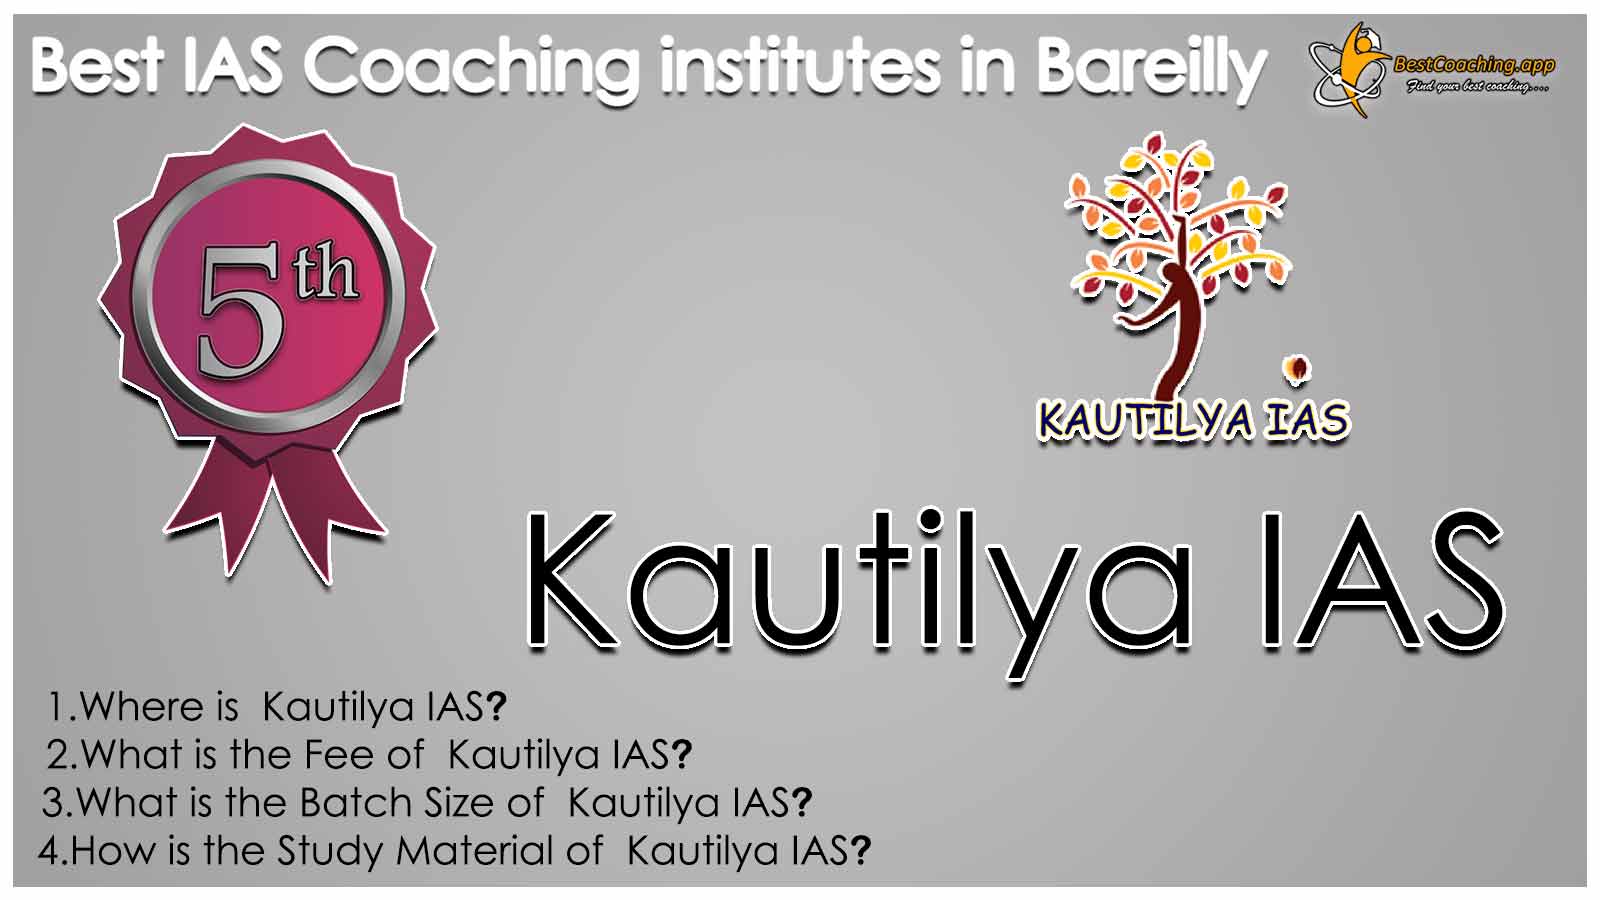 Details of the Top IAS Coaching in Bareilly